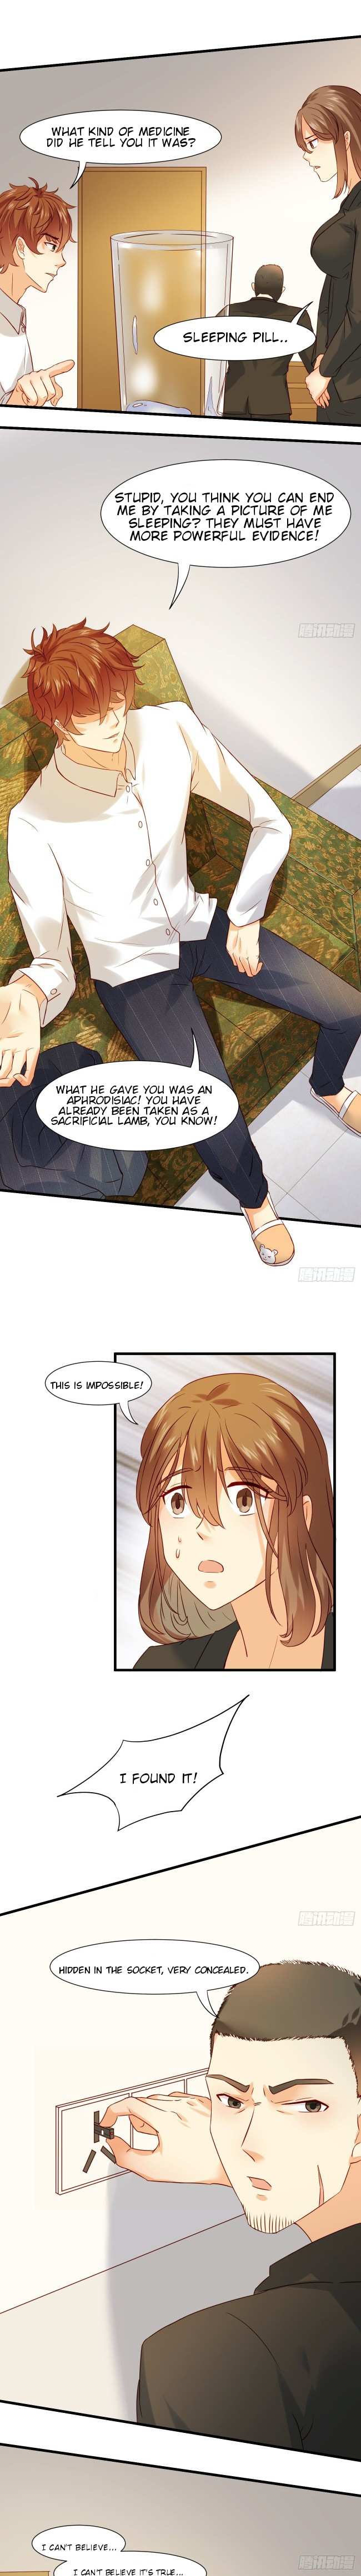 Urban: I Have a New Identity Weekly chapter 10 - page 5